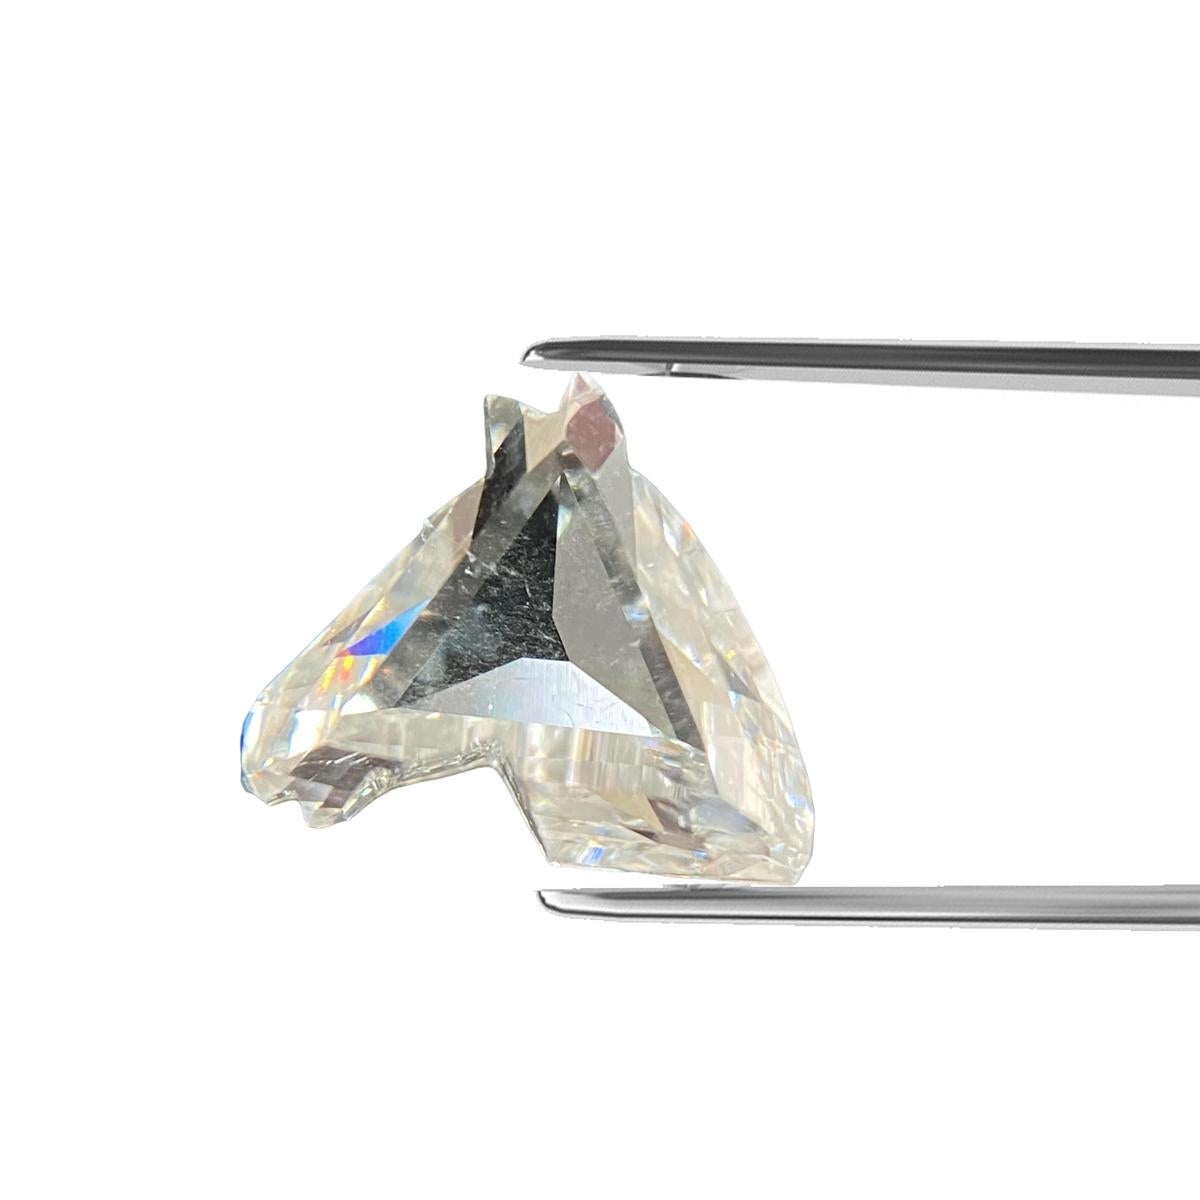 ITEM DESCRIPTION

ID #:	NYC56667
Stone Shape: HORSE STEP CUT
Diamond Weight: 1.02ct
Clarity: SI1
Color: G
Cut:	Excellent
Measurements: 6.19 x 7.21 x 2.99 mm
Depth %:	41.5%
Table %:	62%
Symmetry: Not Applicable
Polish: Very Good
Fluorescence: